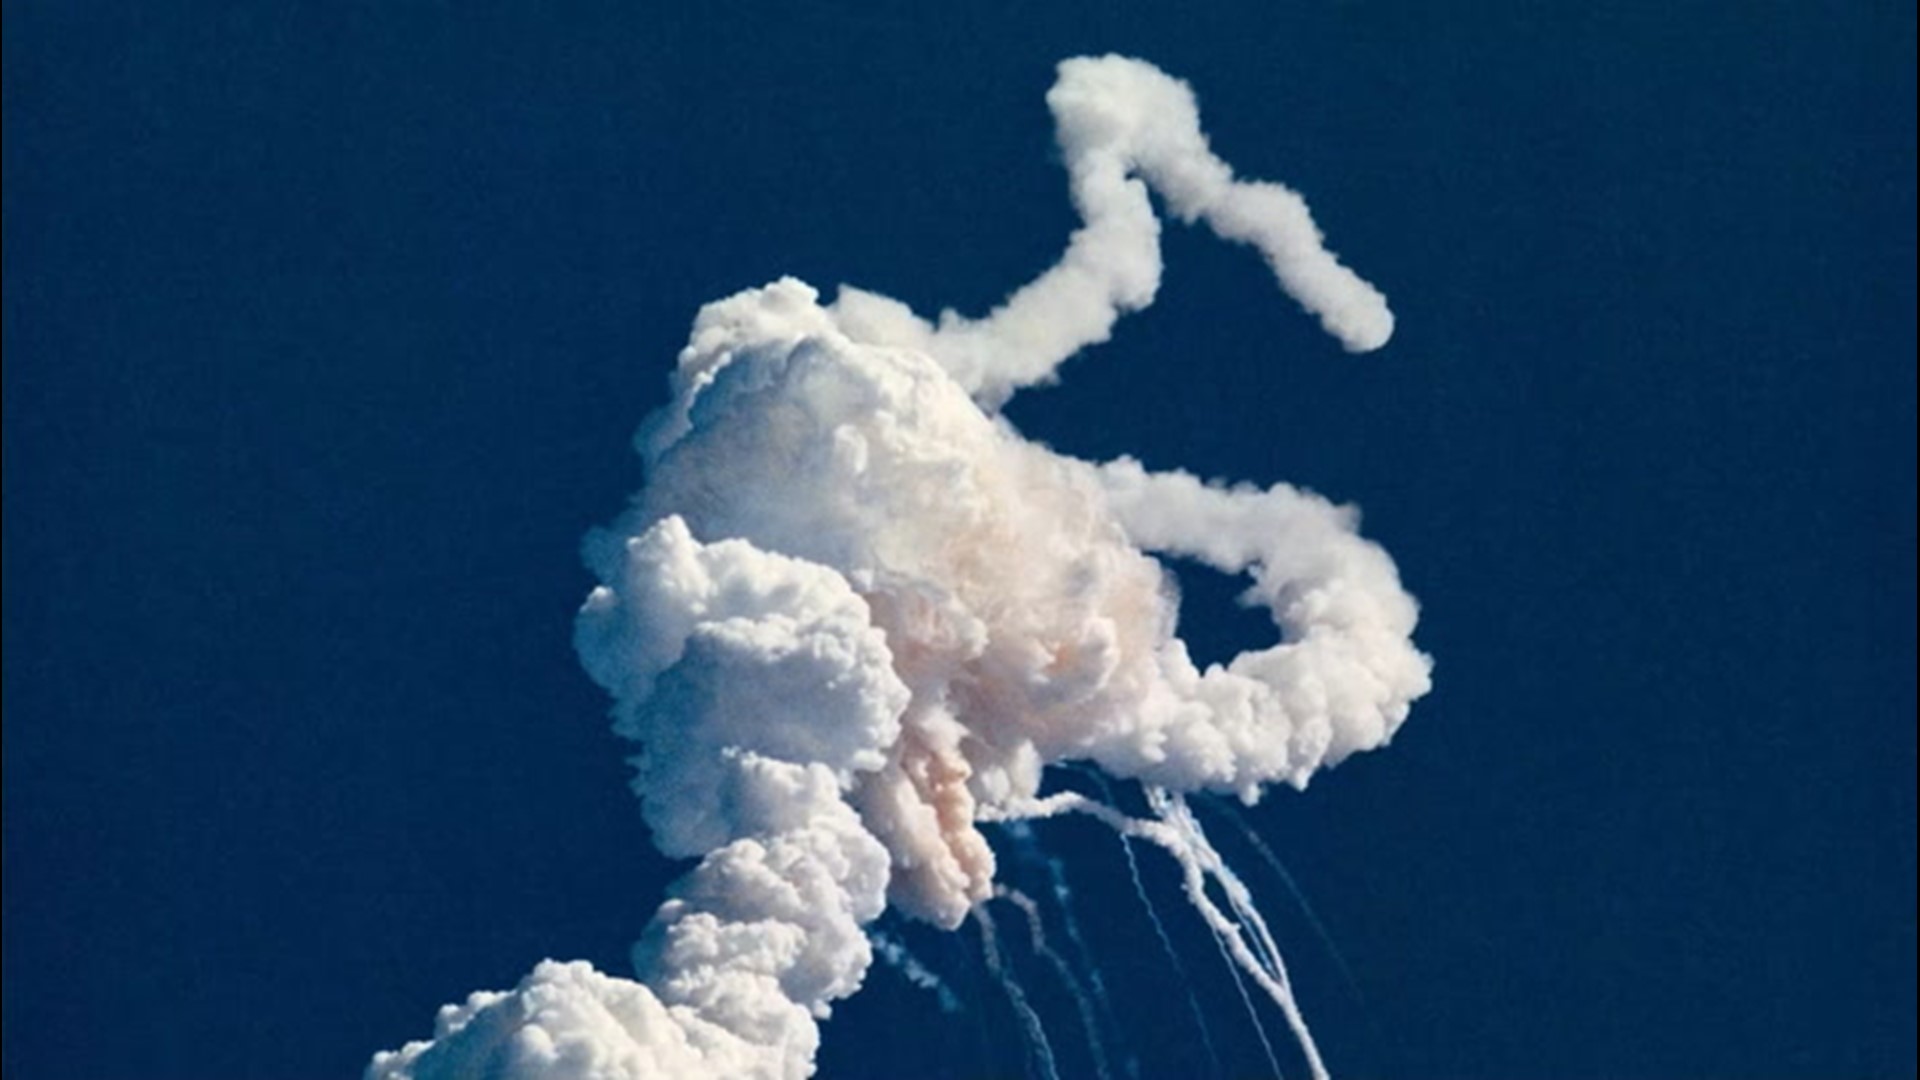 space shuttle challenger disaster of 1986